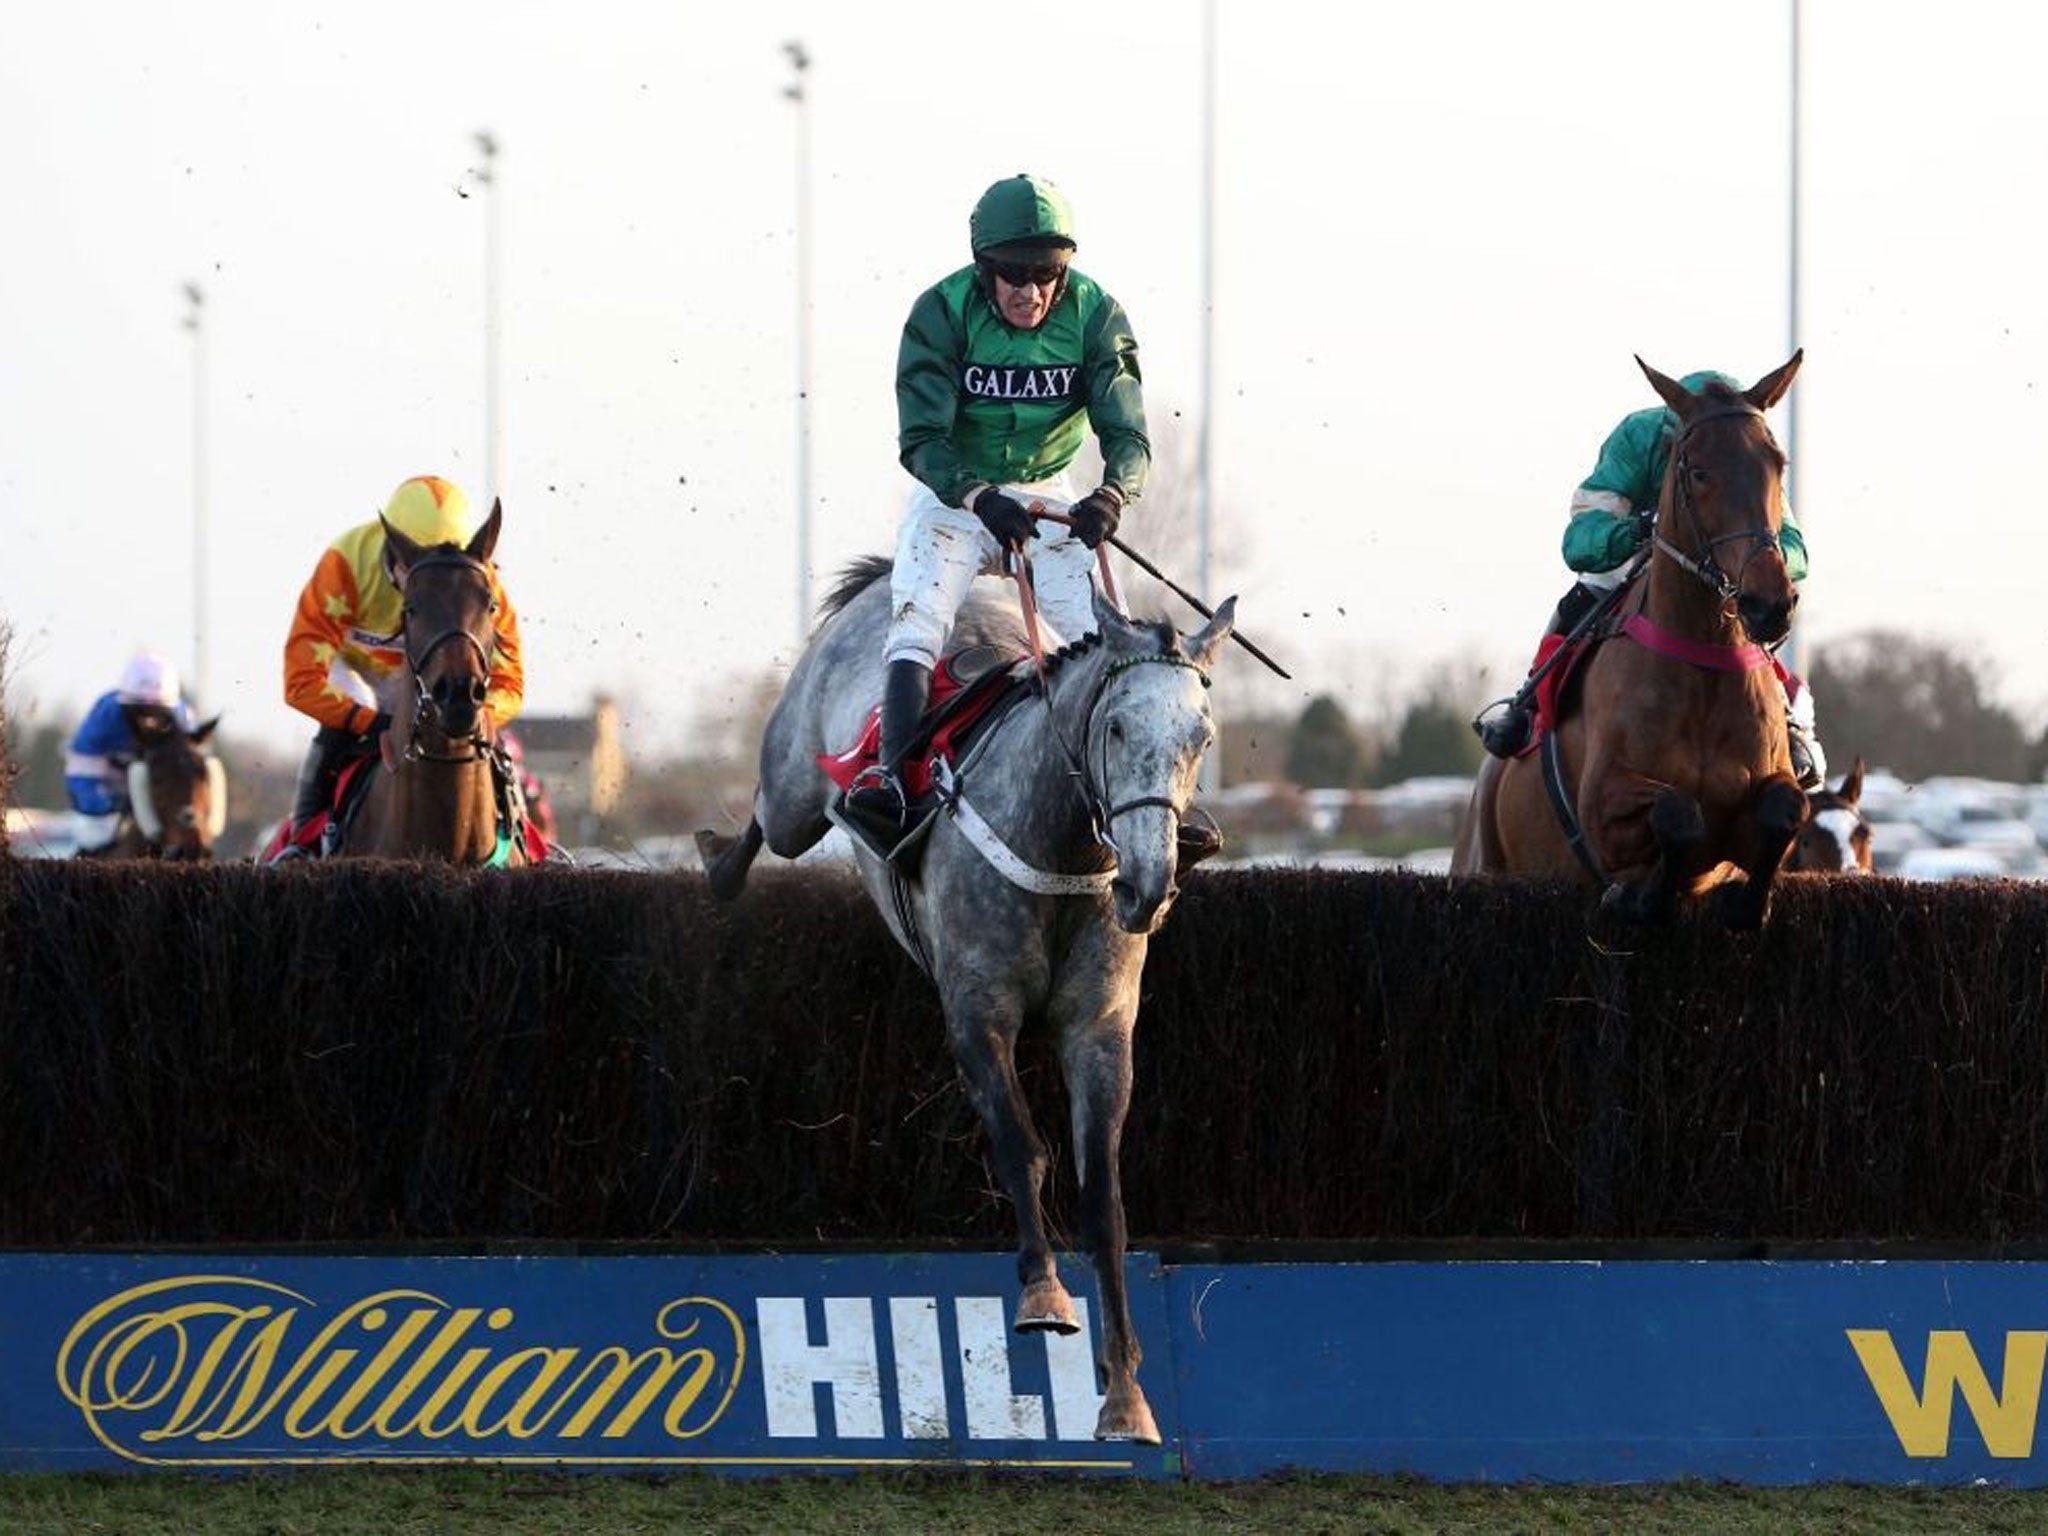 William Hill has started to show signs of form, but upcoming races will be tougher